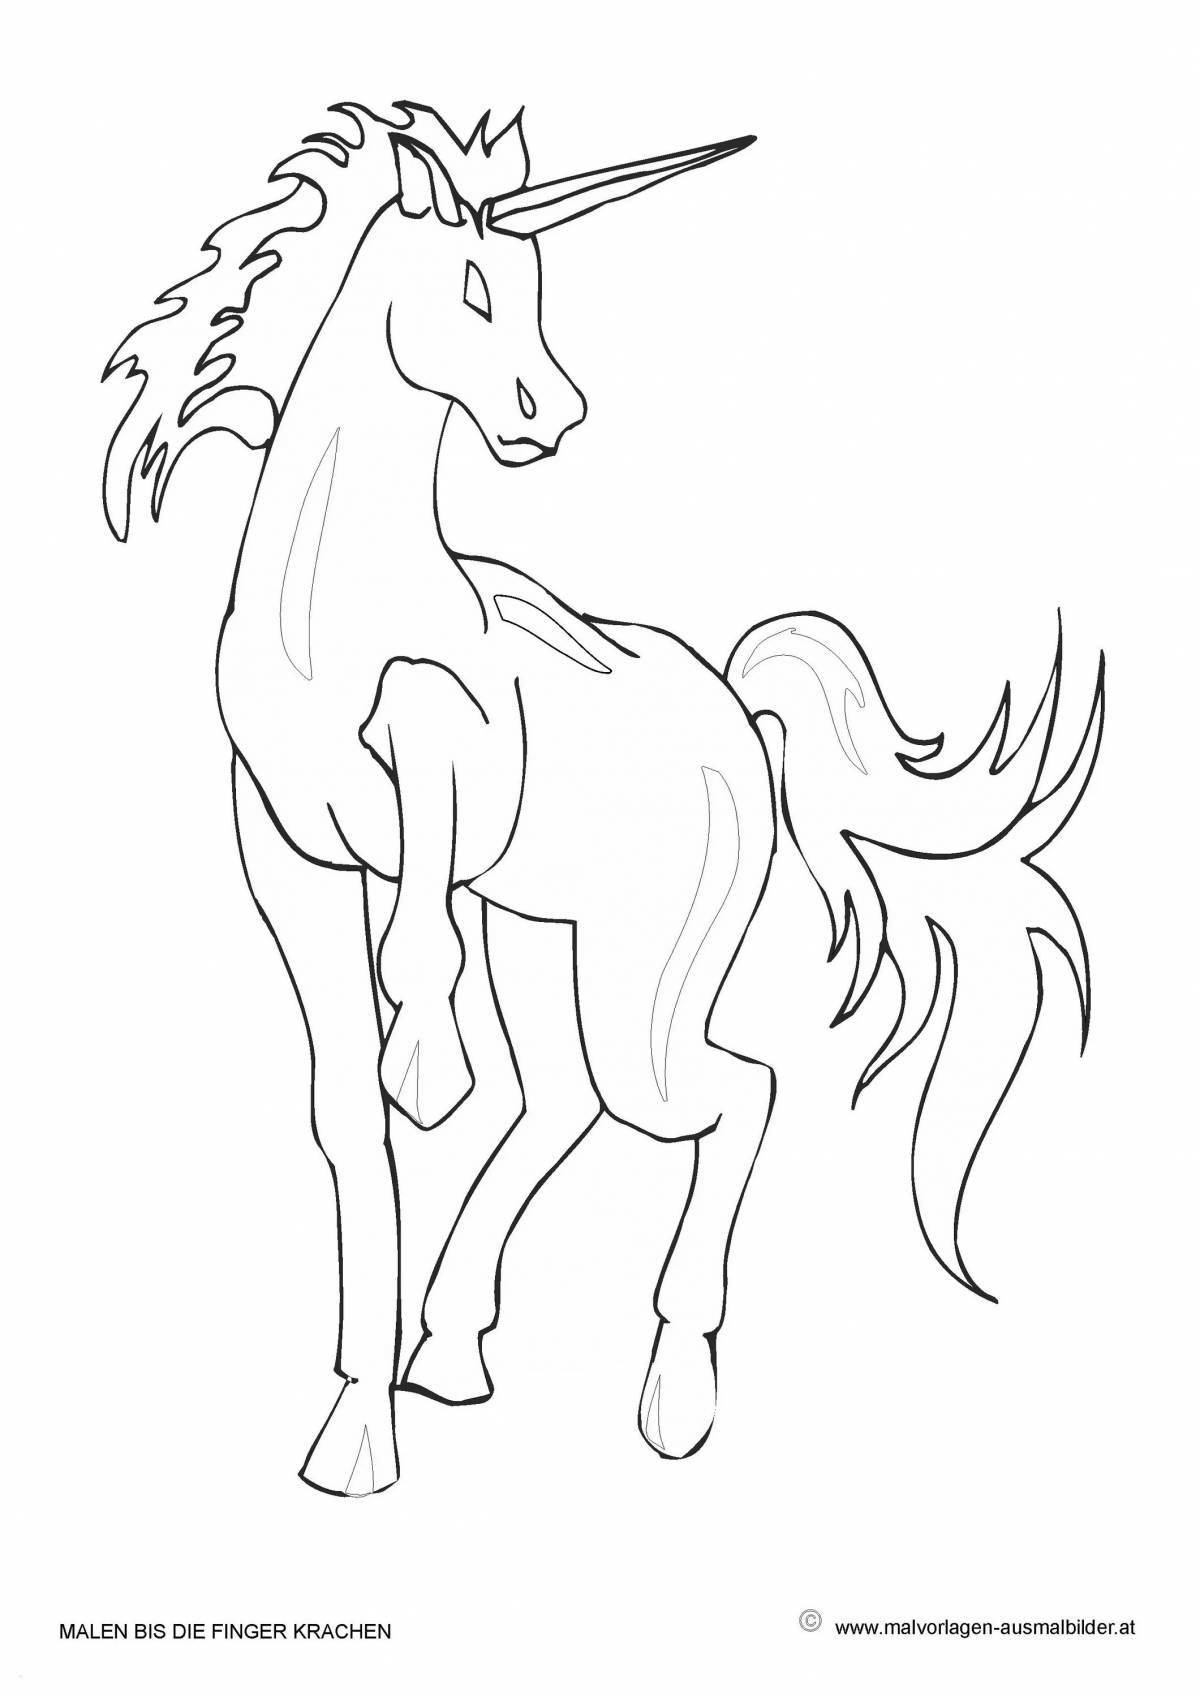 Nice coloring how to draw a unicorn